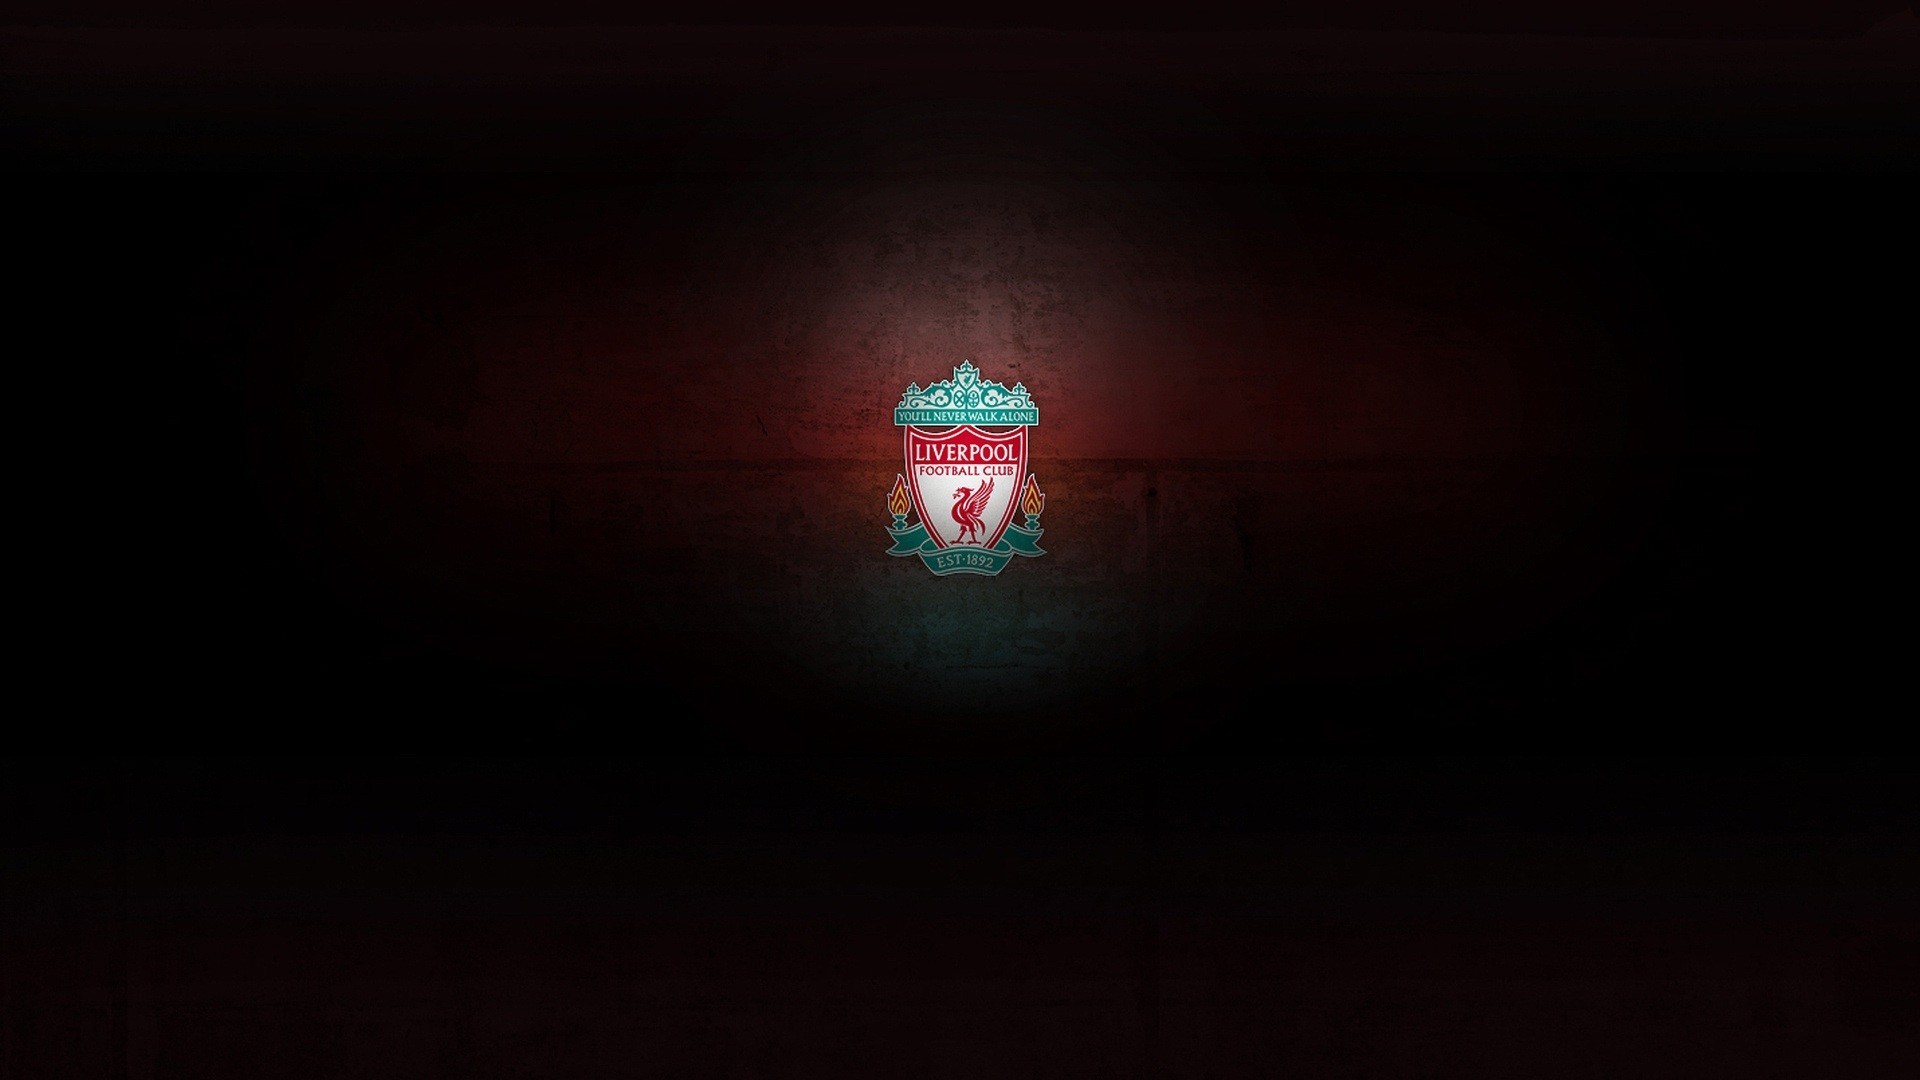 1920x1080 Download free Apple iPhone liverpool wallpapers most